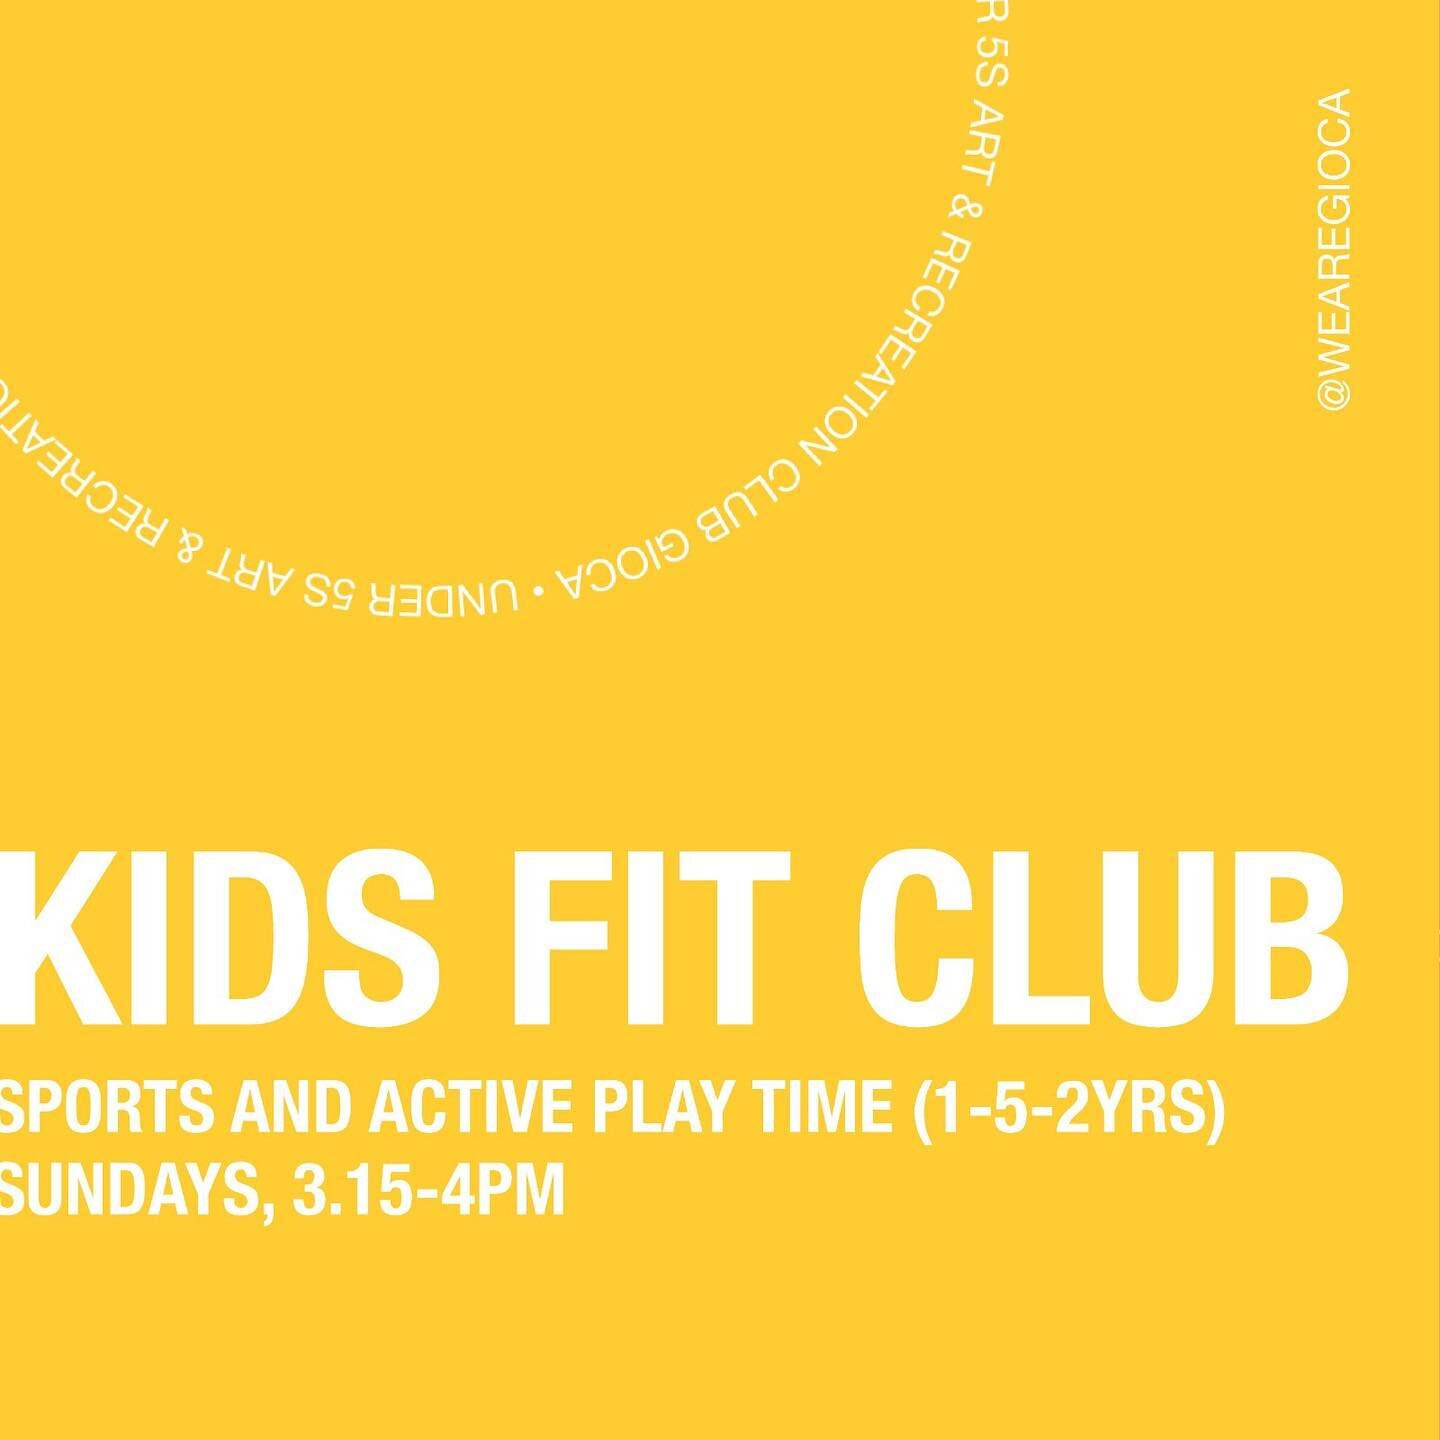 Ready, steady, goooal! ⚽️

Next up, we introduce two amazing new workshops in partnership with @kidsfitclub_london, to offer your little ones with a fun-filled and inclusive start to physical education.

Kids Fit Club &mdash; Sports and Active Play T